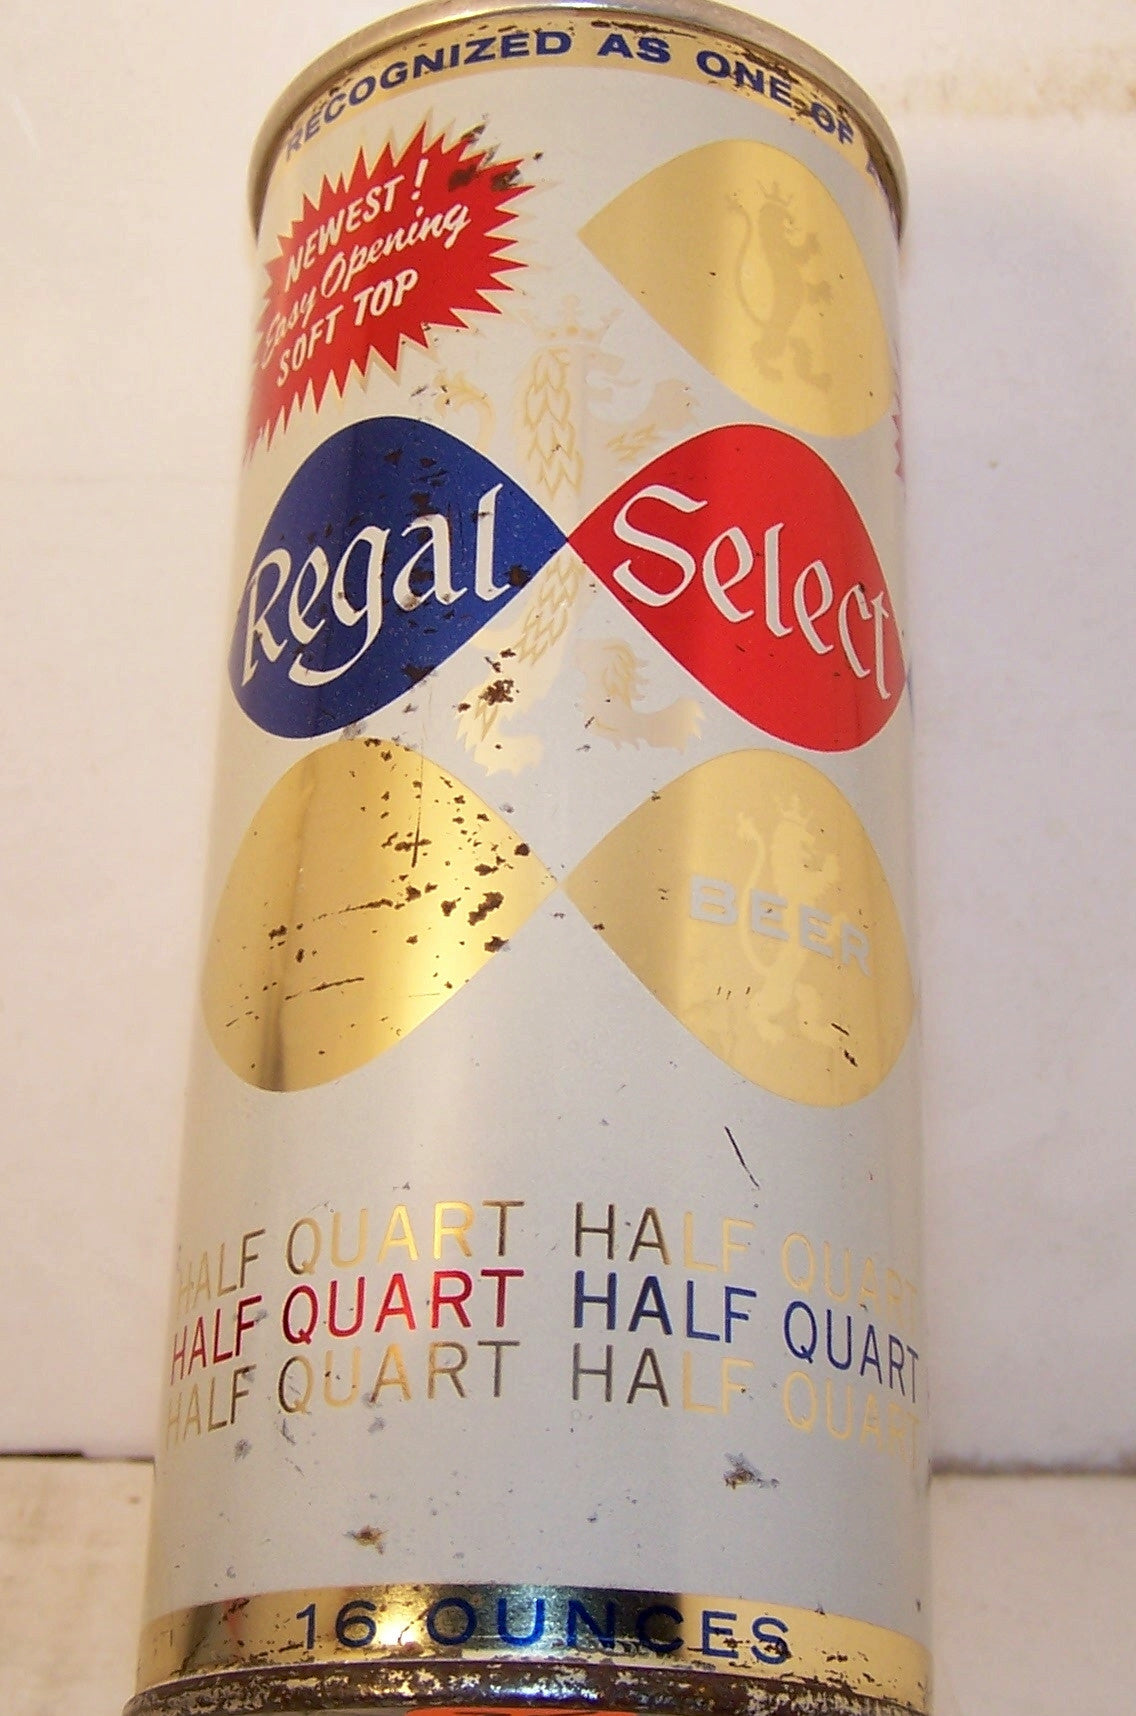 Regal Select Beer, Newest Easy Opening Soft Top, USBC 234-24, Grade 1/ 1- Sold on 2/11/15